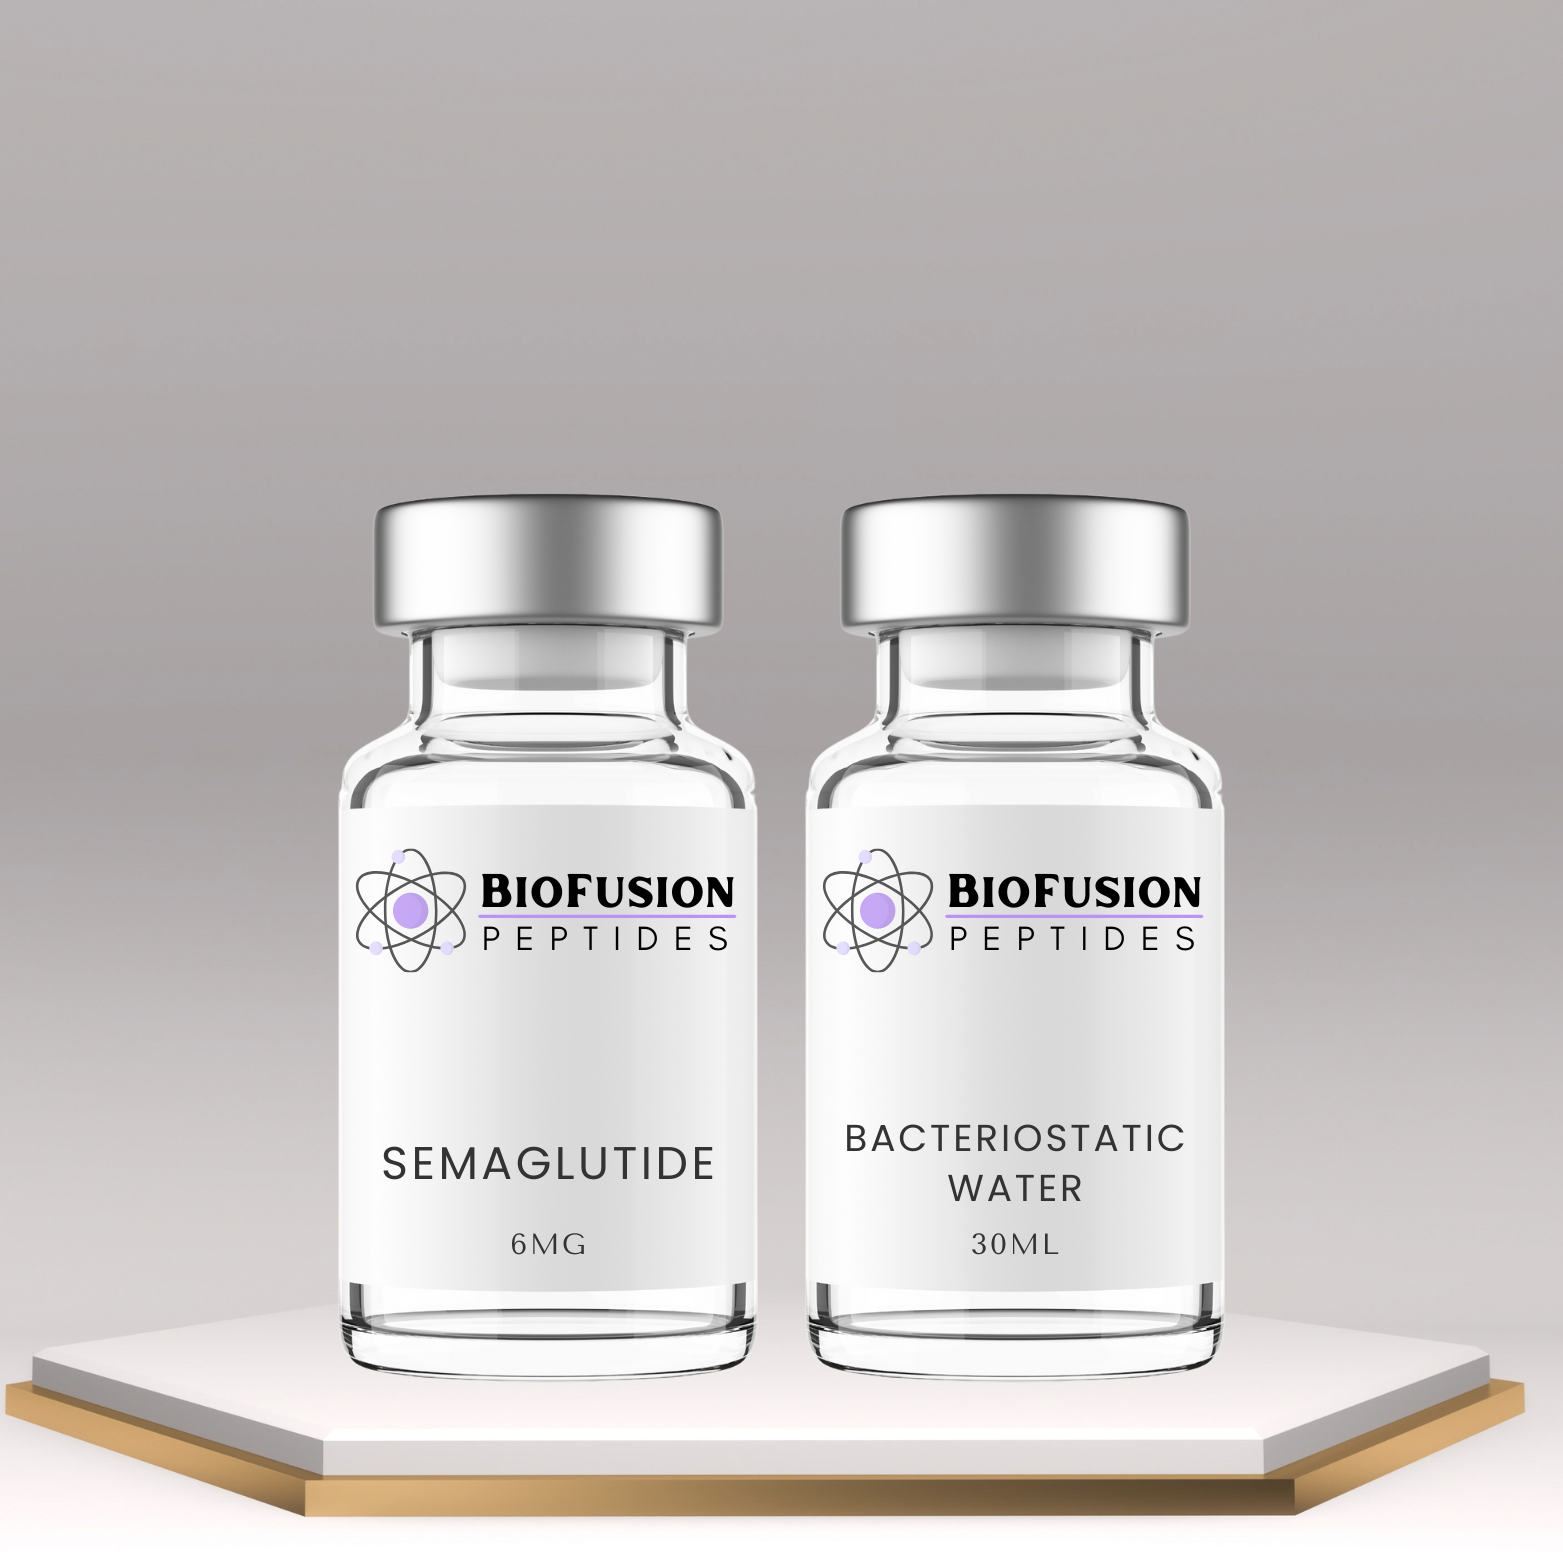 BioFusion Peptides Semaglutide 6MG kit with bacteriostatic water